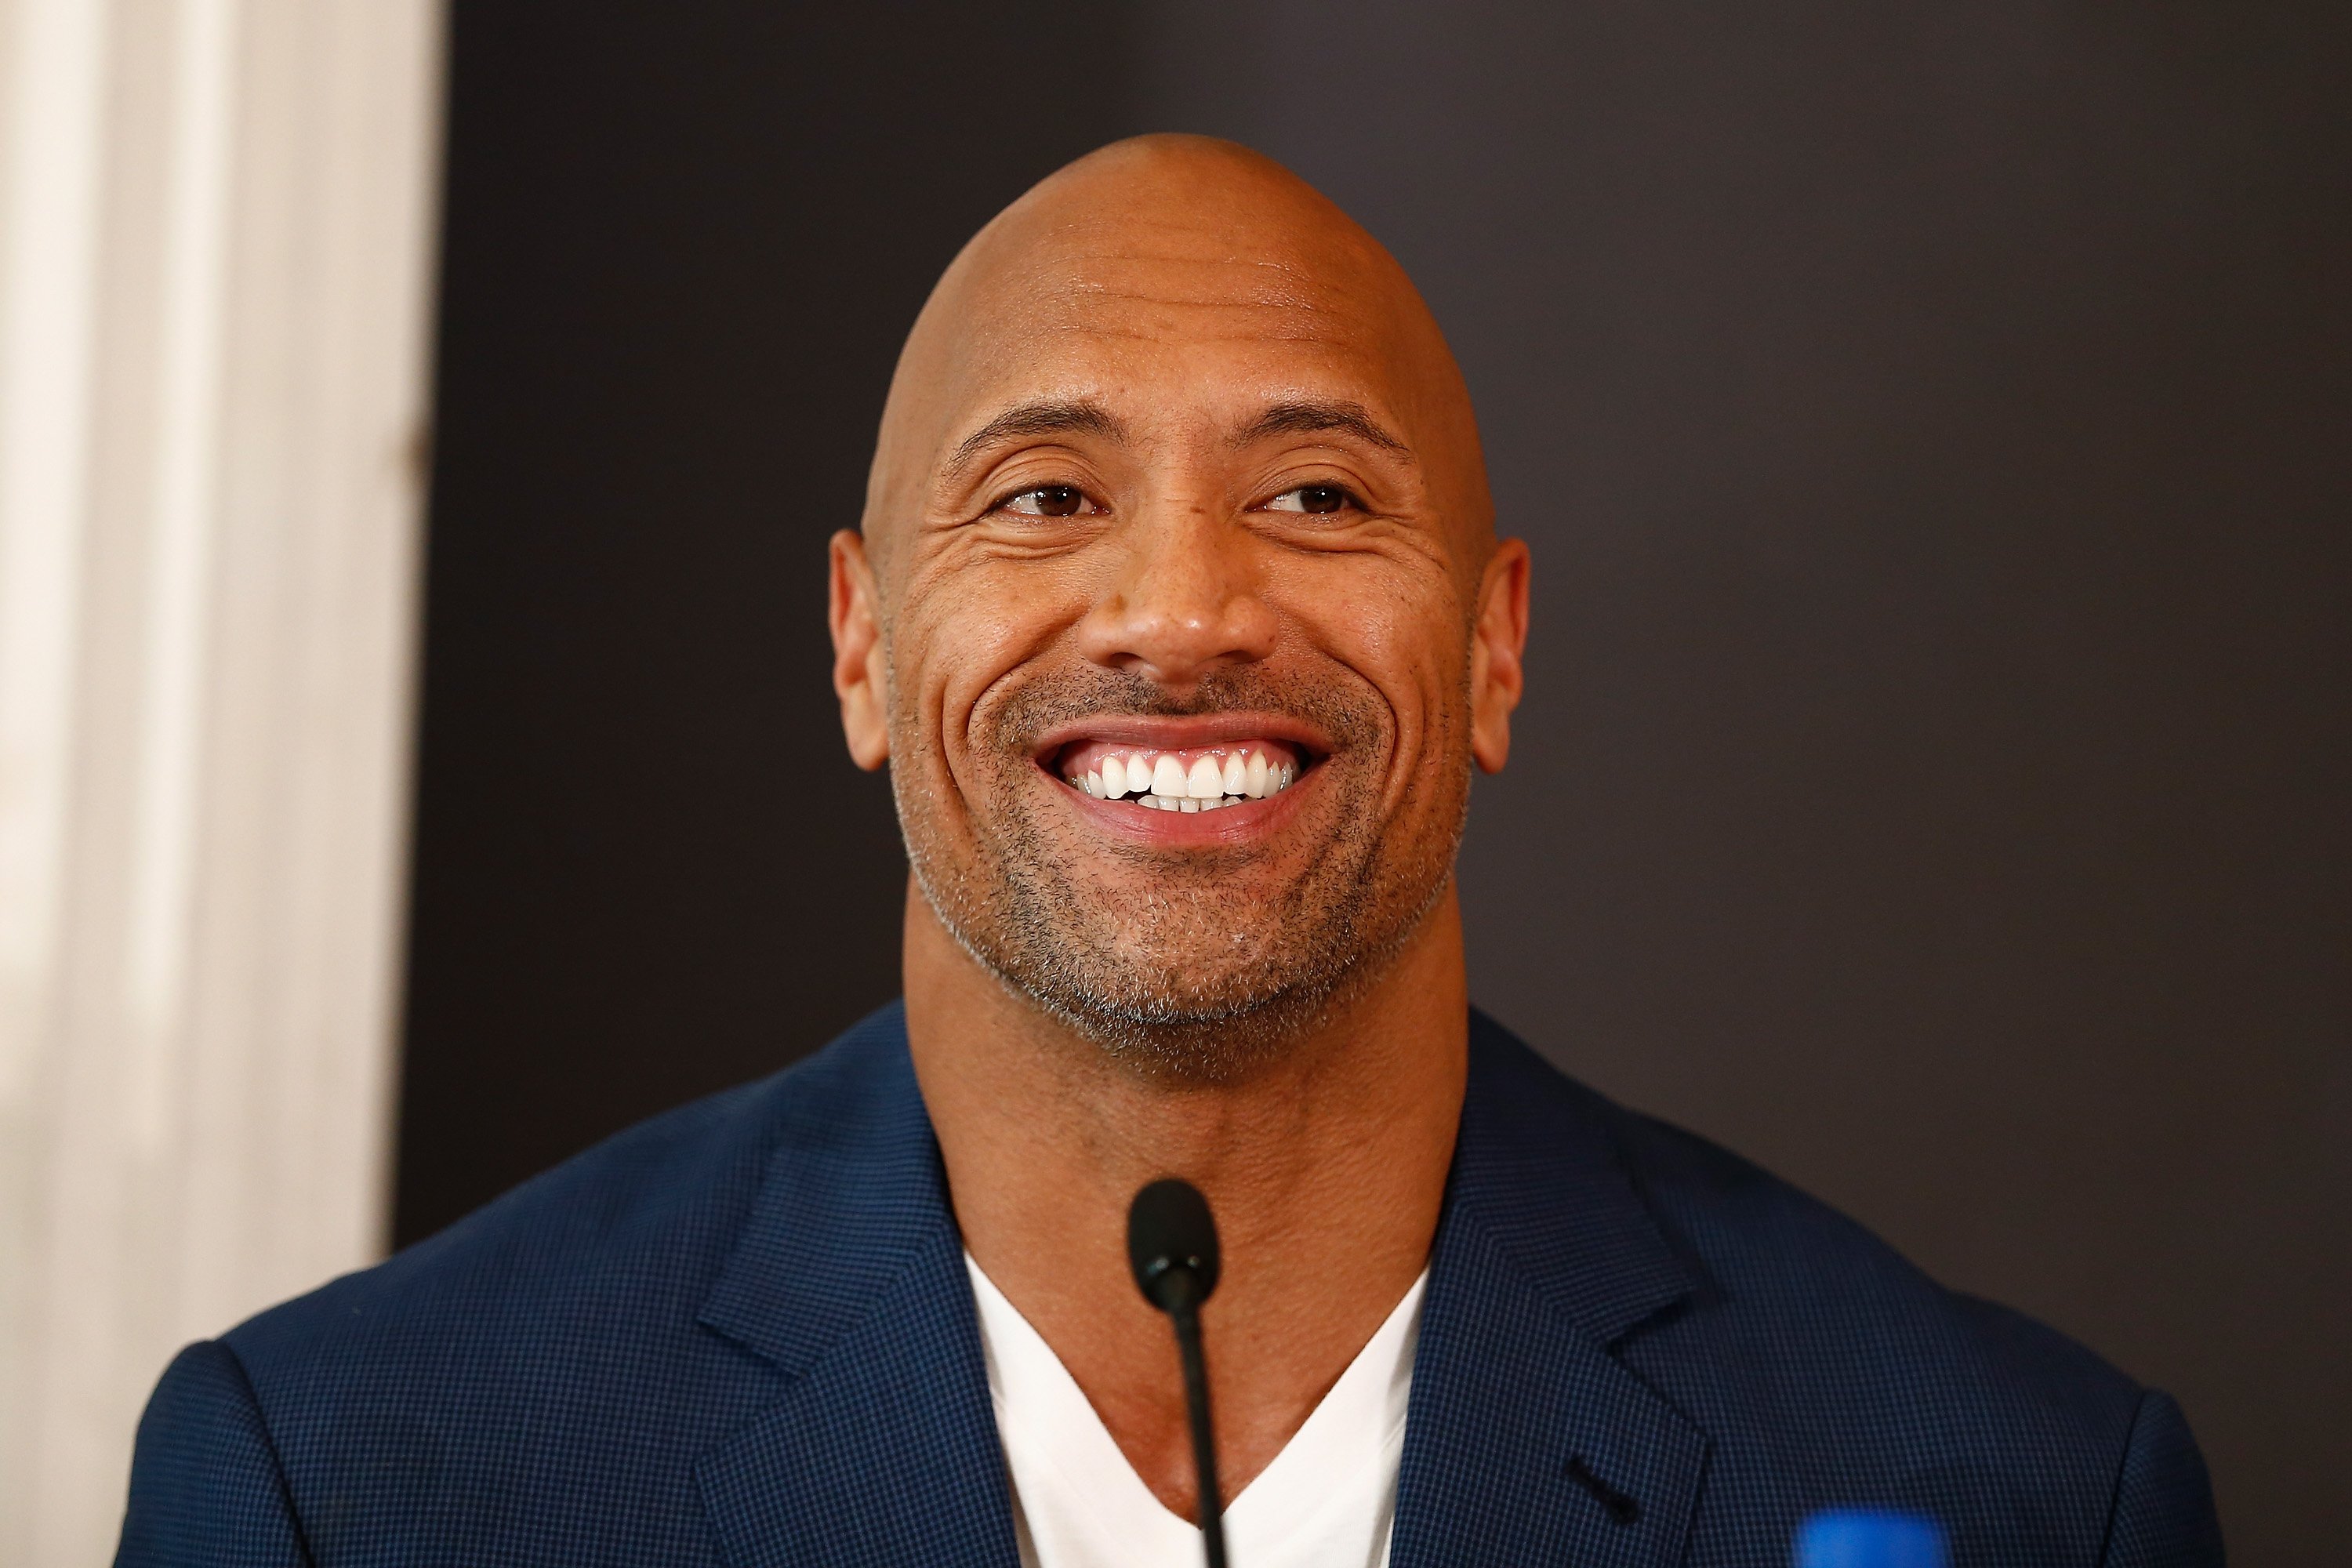 Dwayne Johnson attends the press conference of Paramount Pictures 'HERCULES' on Aug. 21, 2014 in Berlin, Germany | Photo: Getty Images